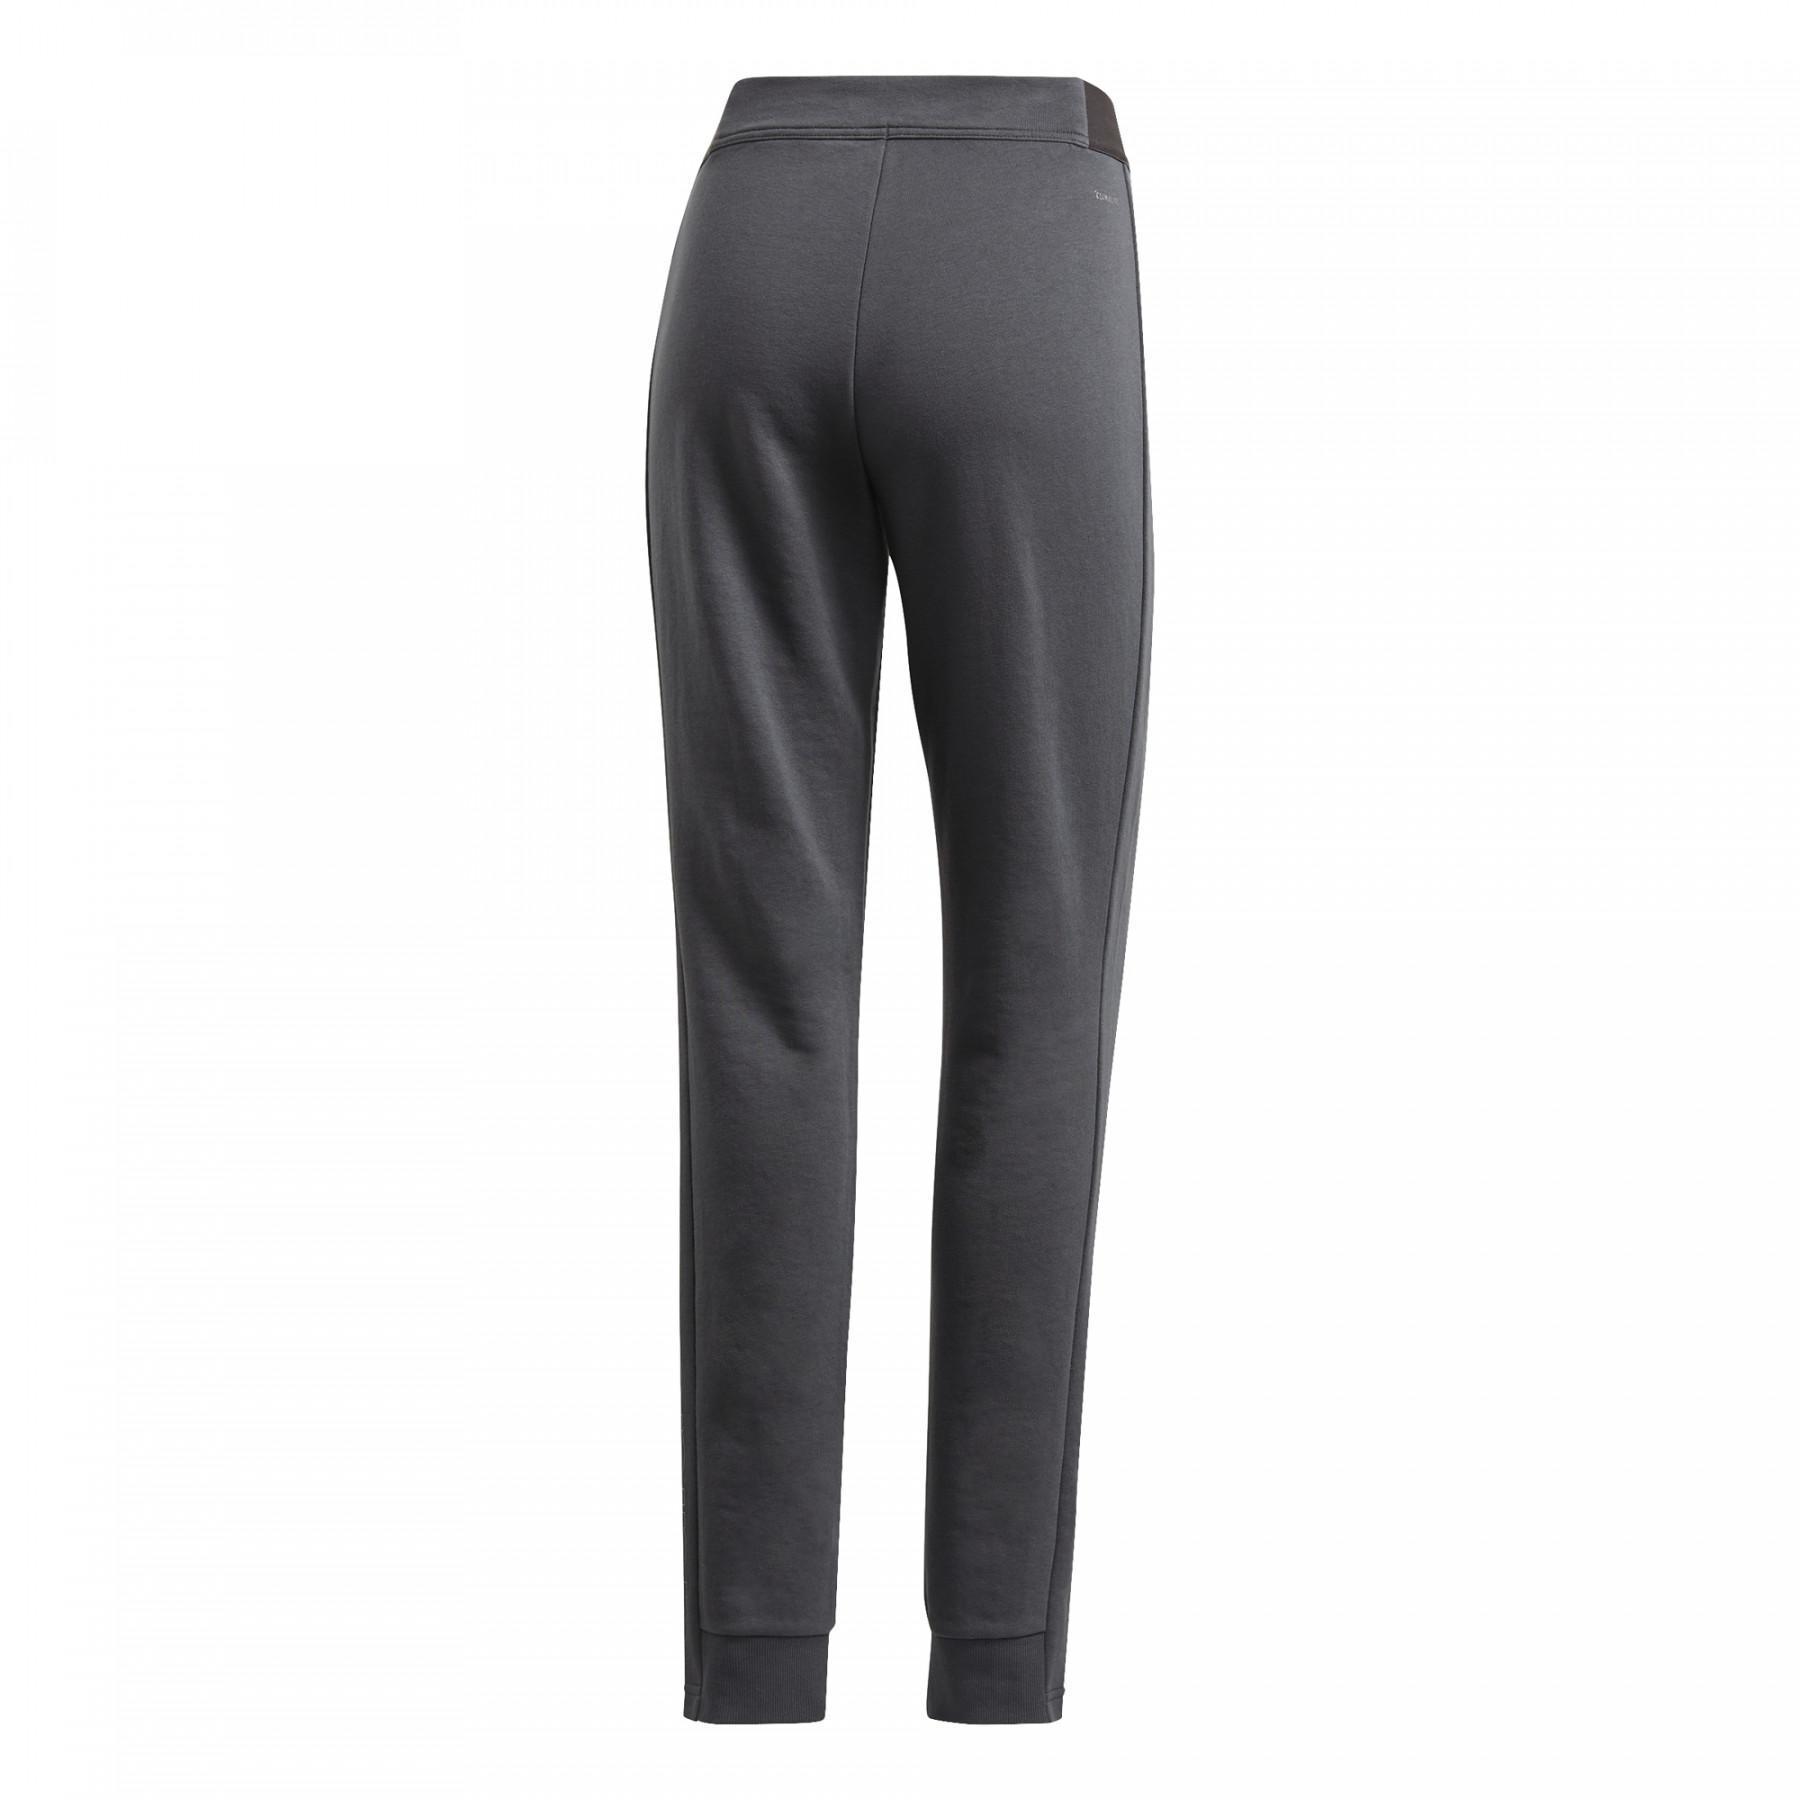 Women's trousers adidas Motion